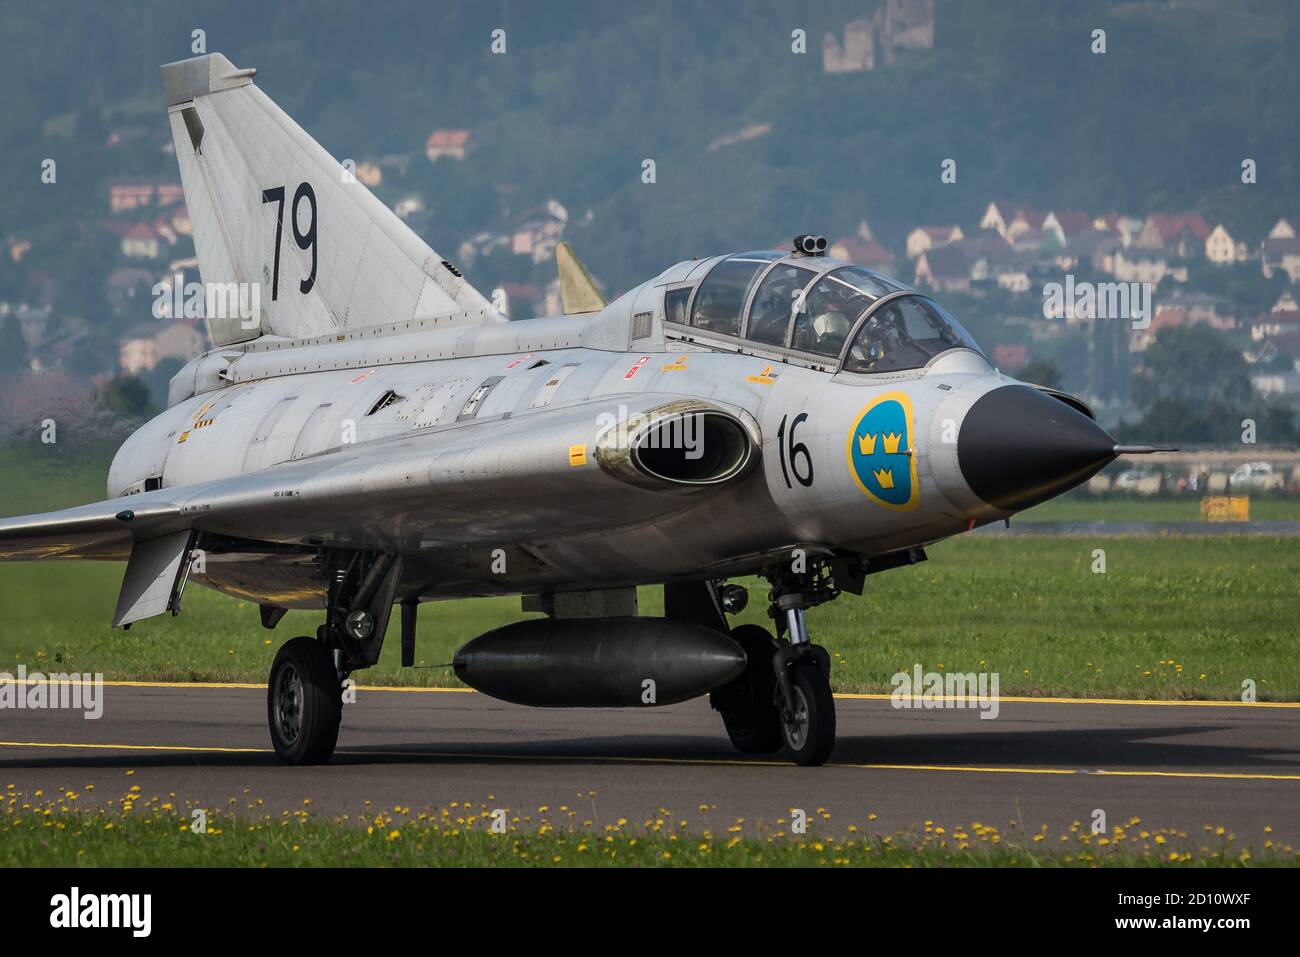 ZELTWEG, STYRIA, AUSTRIA - SEPTEMBER 02: One of the biggest airshows in Europe is Airpower and it is organized by Red Bull and Austrian Army in Zeltwe Stock Photo